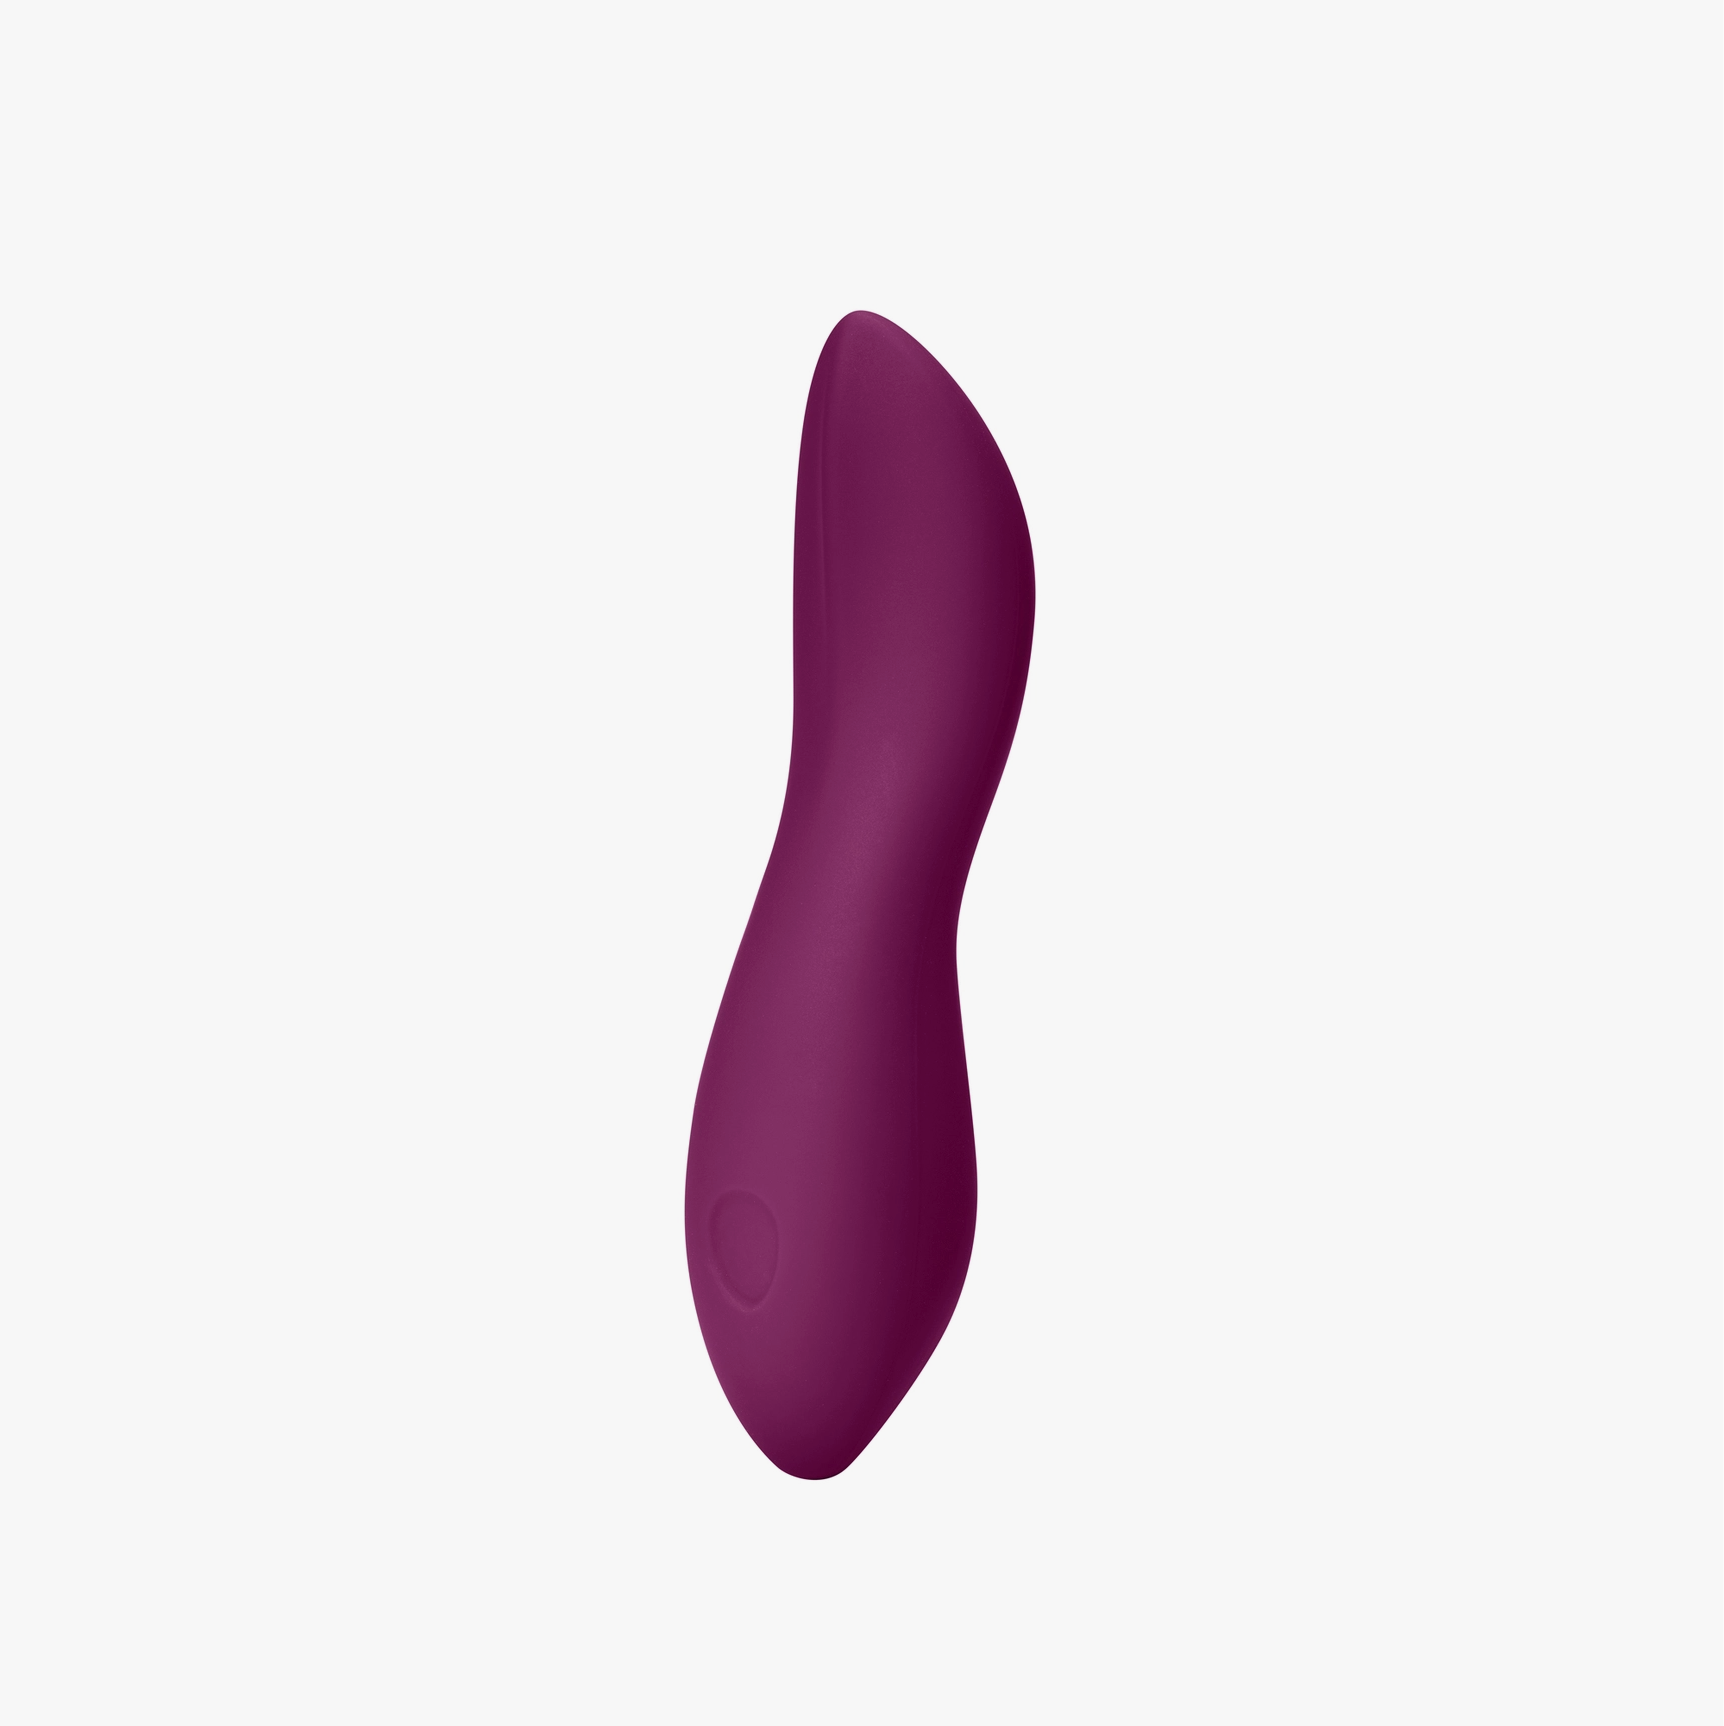 Dame Products Dip, Classic Vibrator